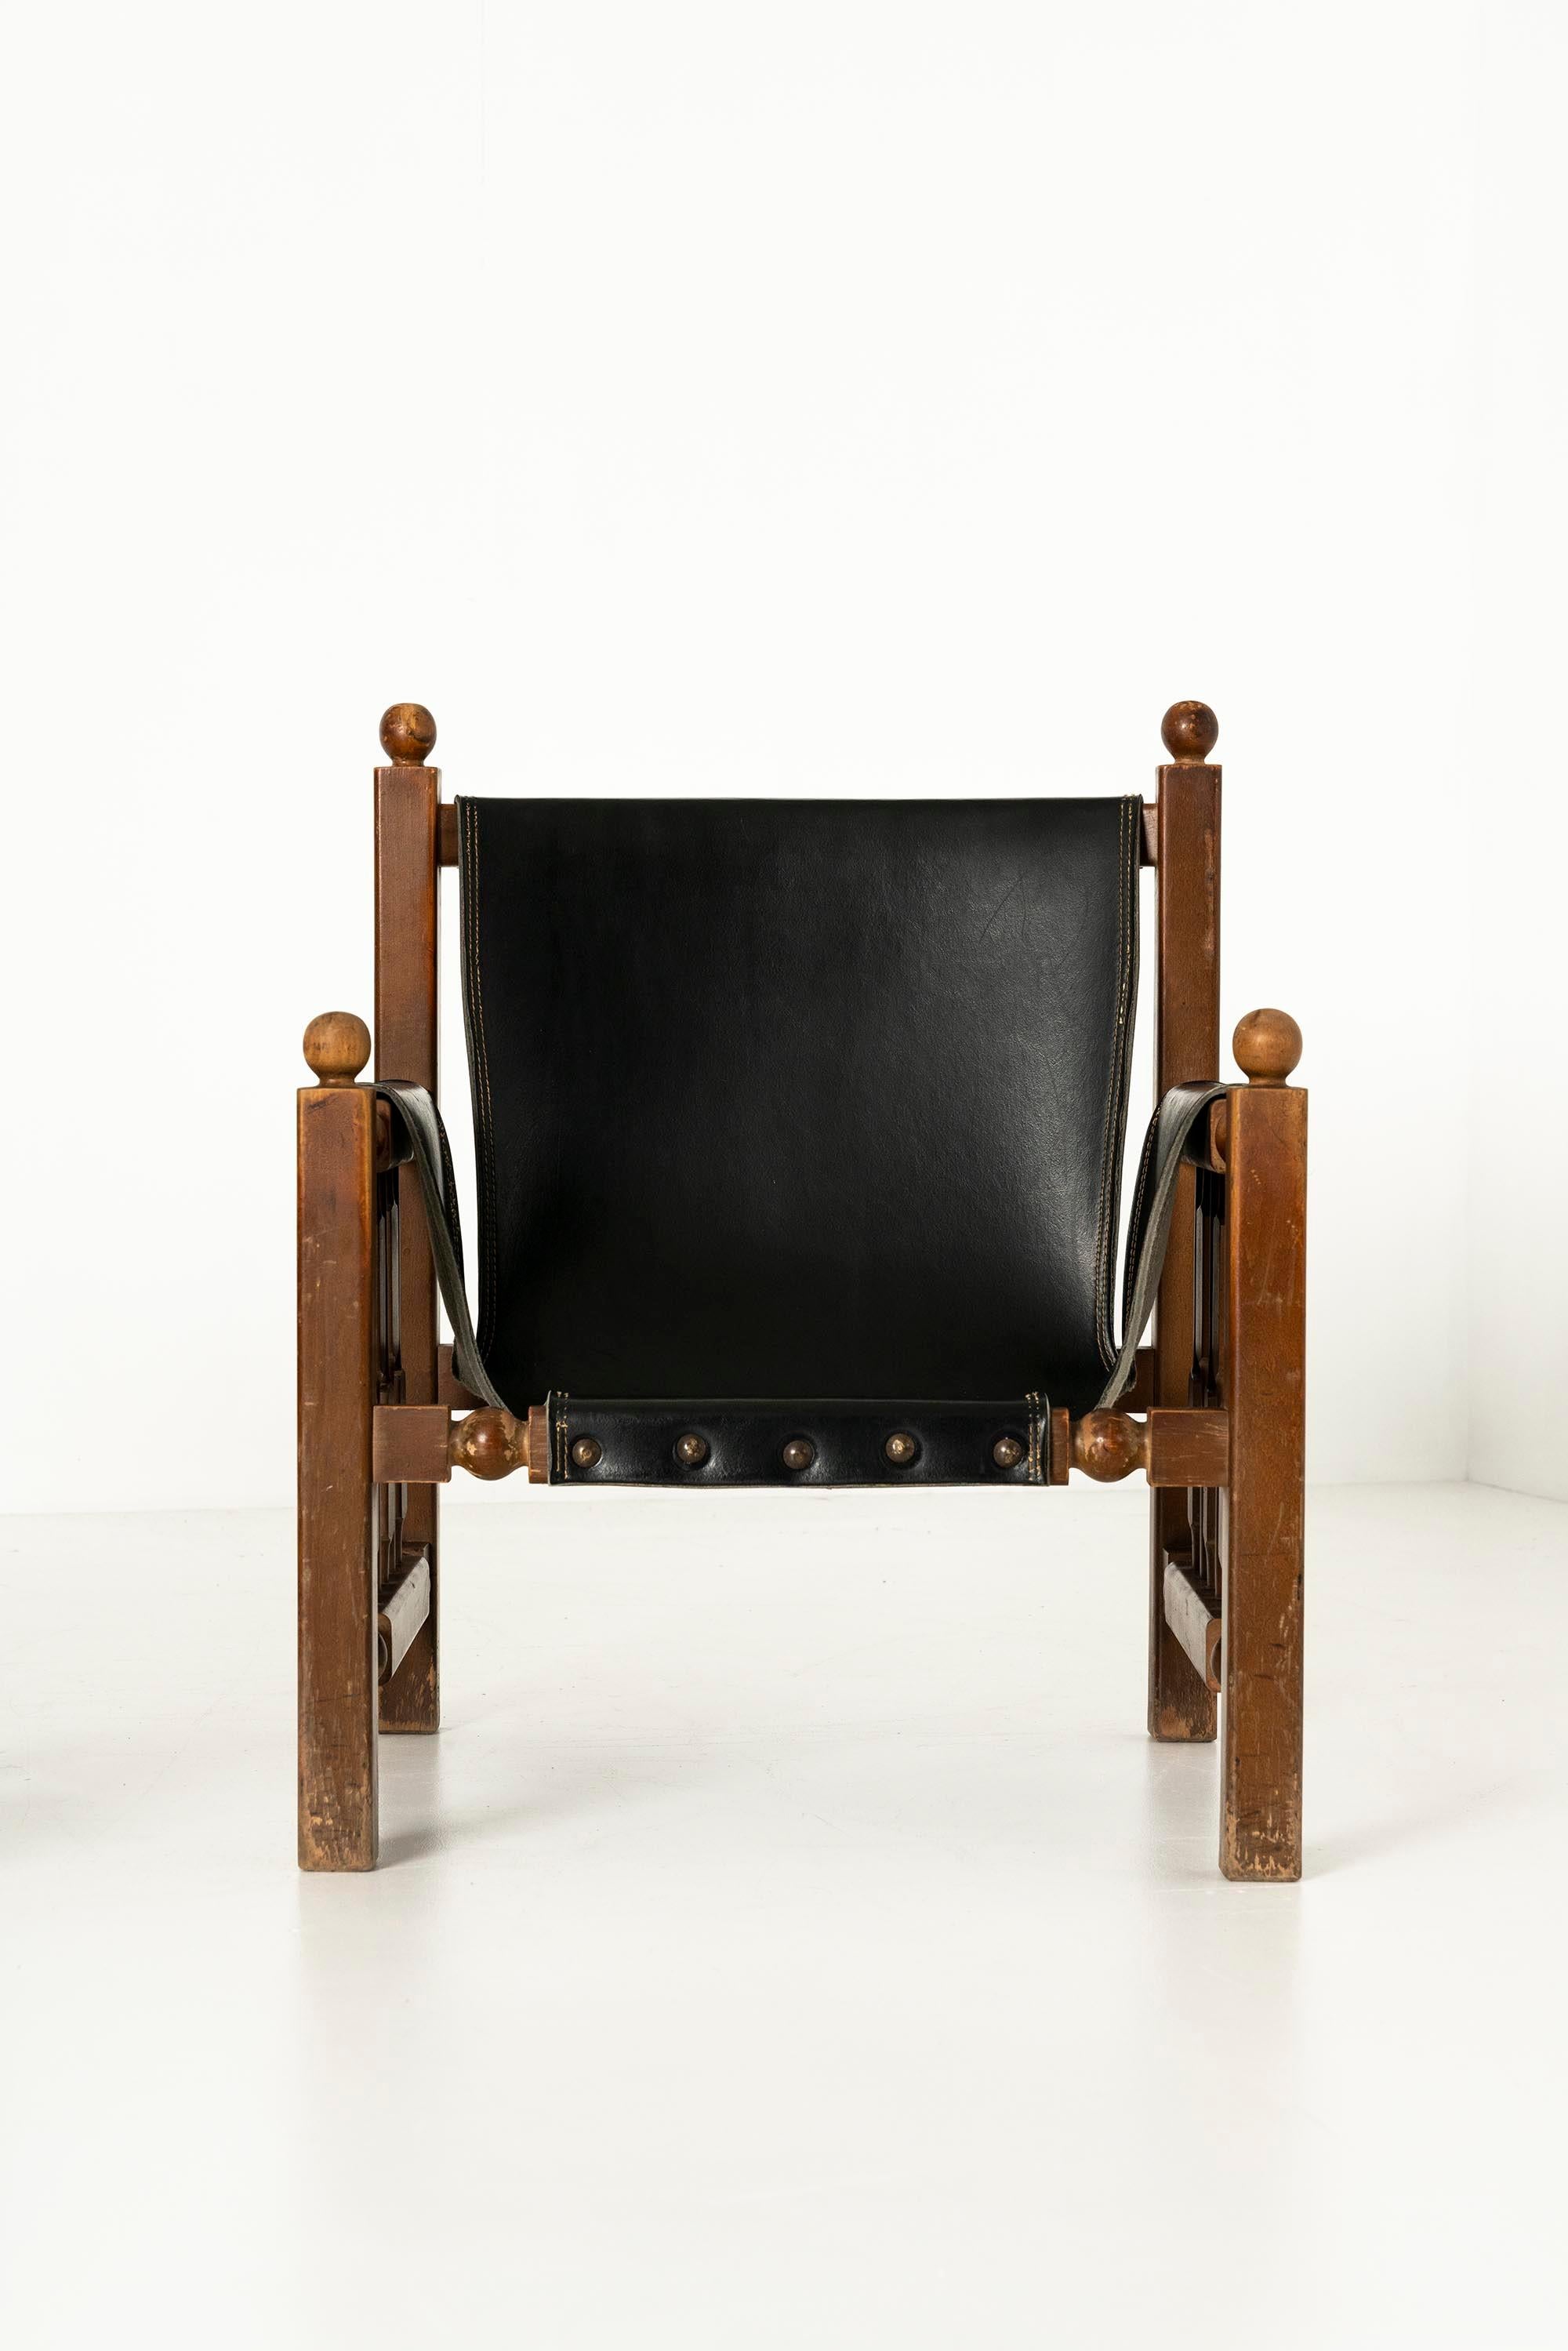 European Brutalist Oak Chairs with Faux Leather in the Style of Charles Dudouyt, 1950s For Sale